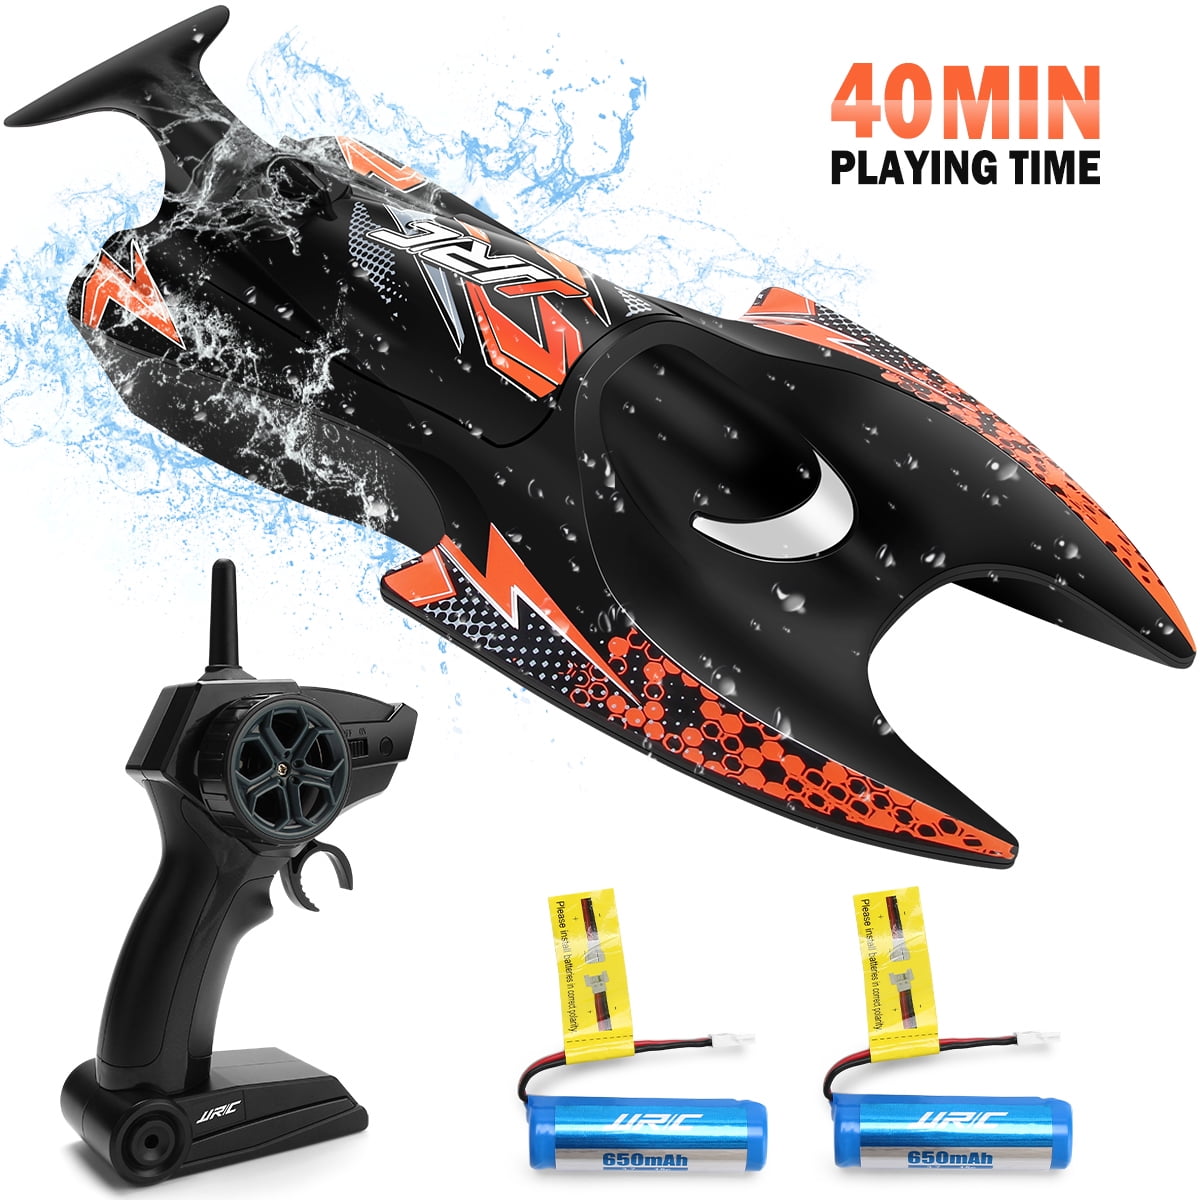 Remote Control Boat for Pools and Lakes for Kids an Force1 Wave Speeder RC Boat